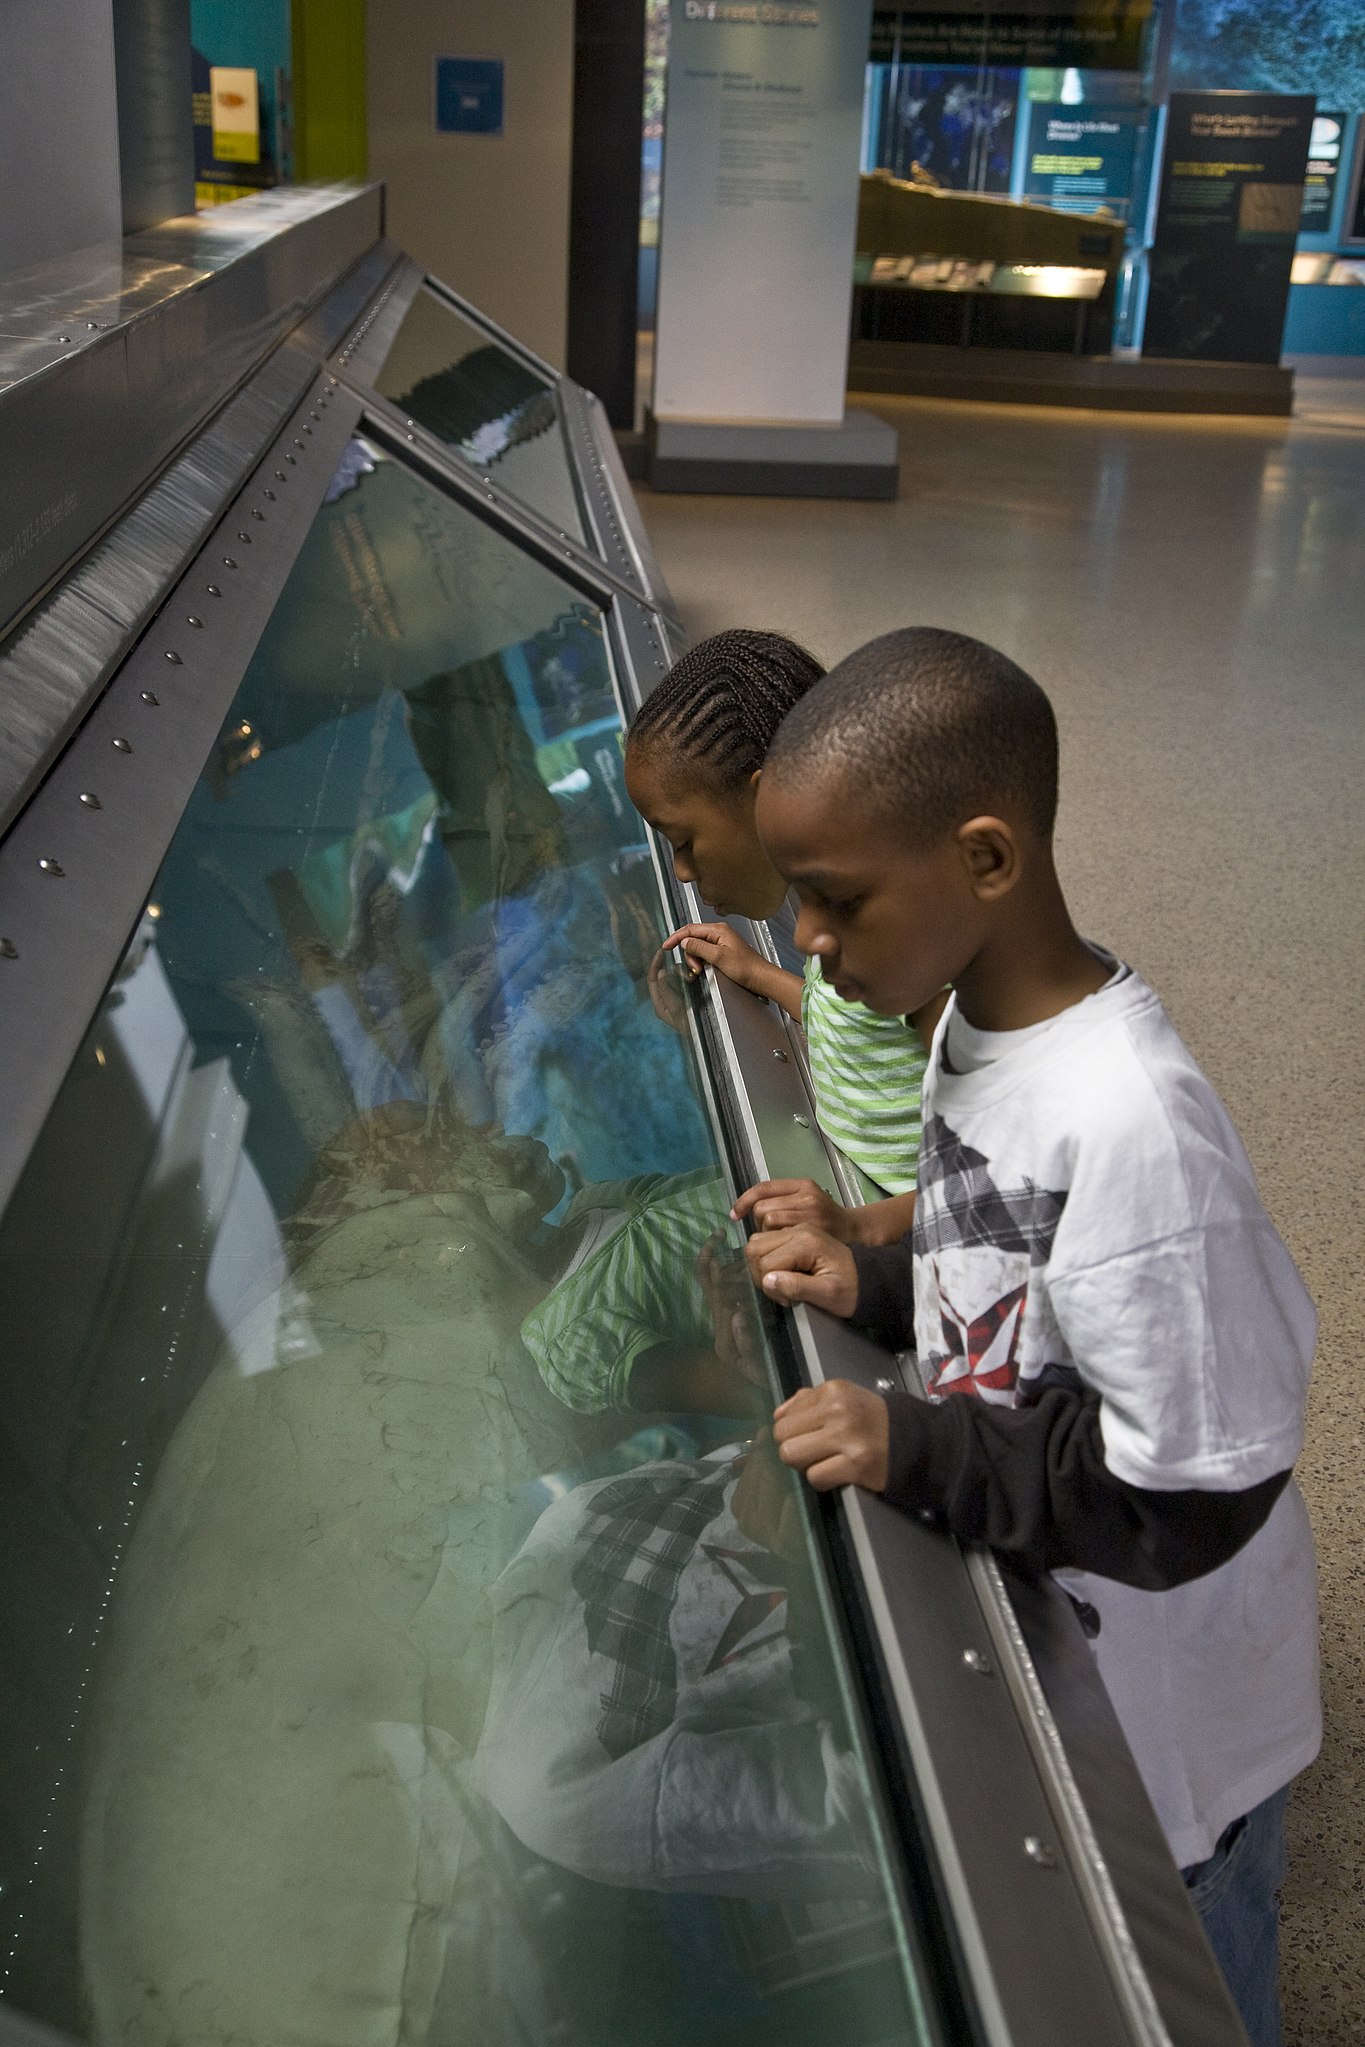 File:Viewing the female squid in the Sant Ocean Hall at the Smithsonian National Museum of Natural History. (4560507527).jpg - Wikimedia Commons